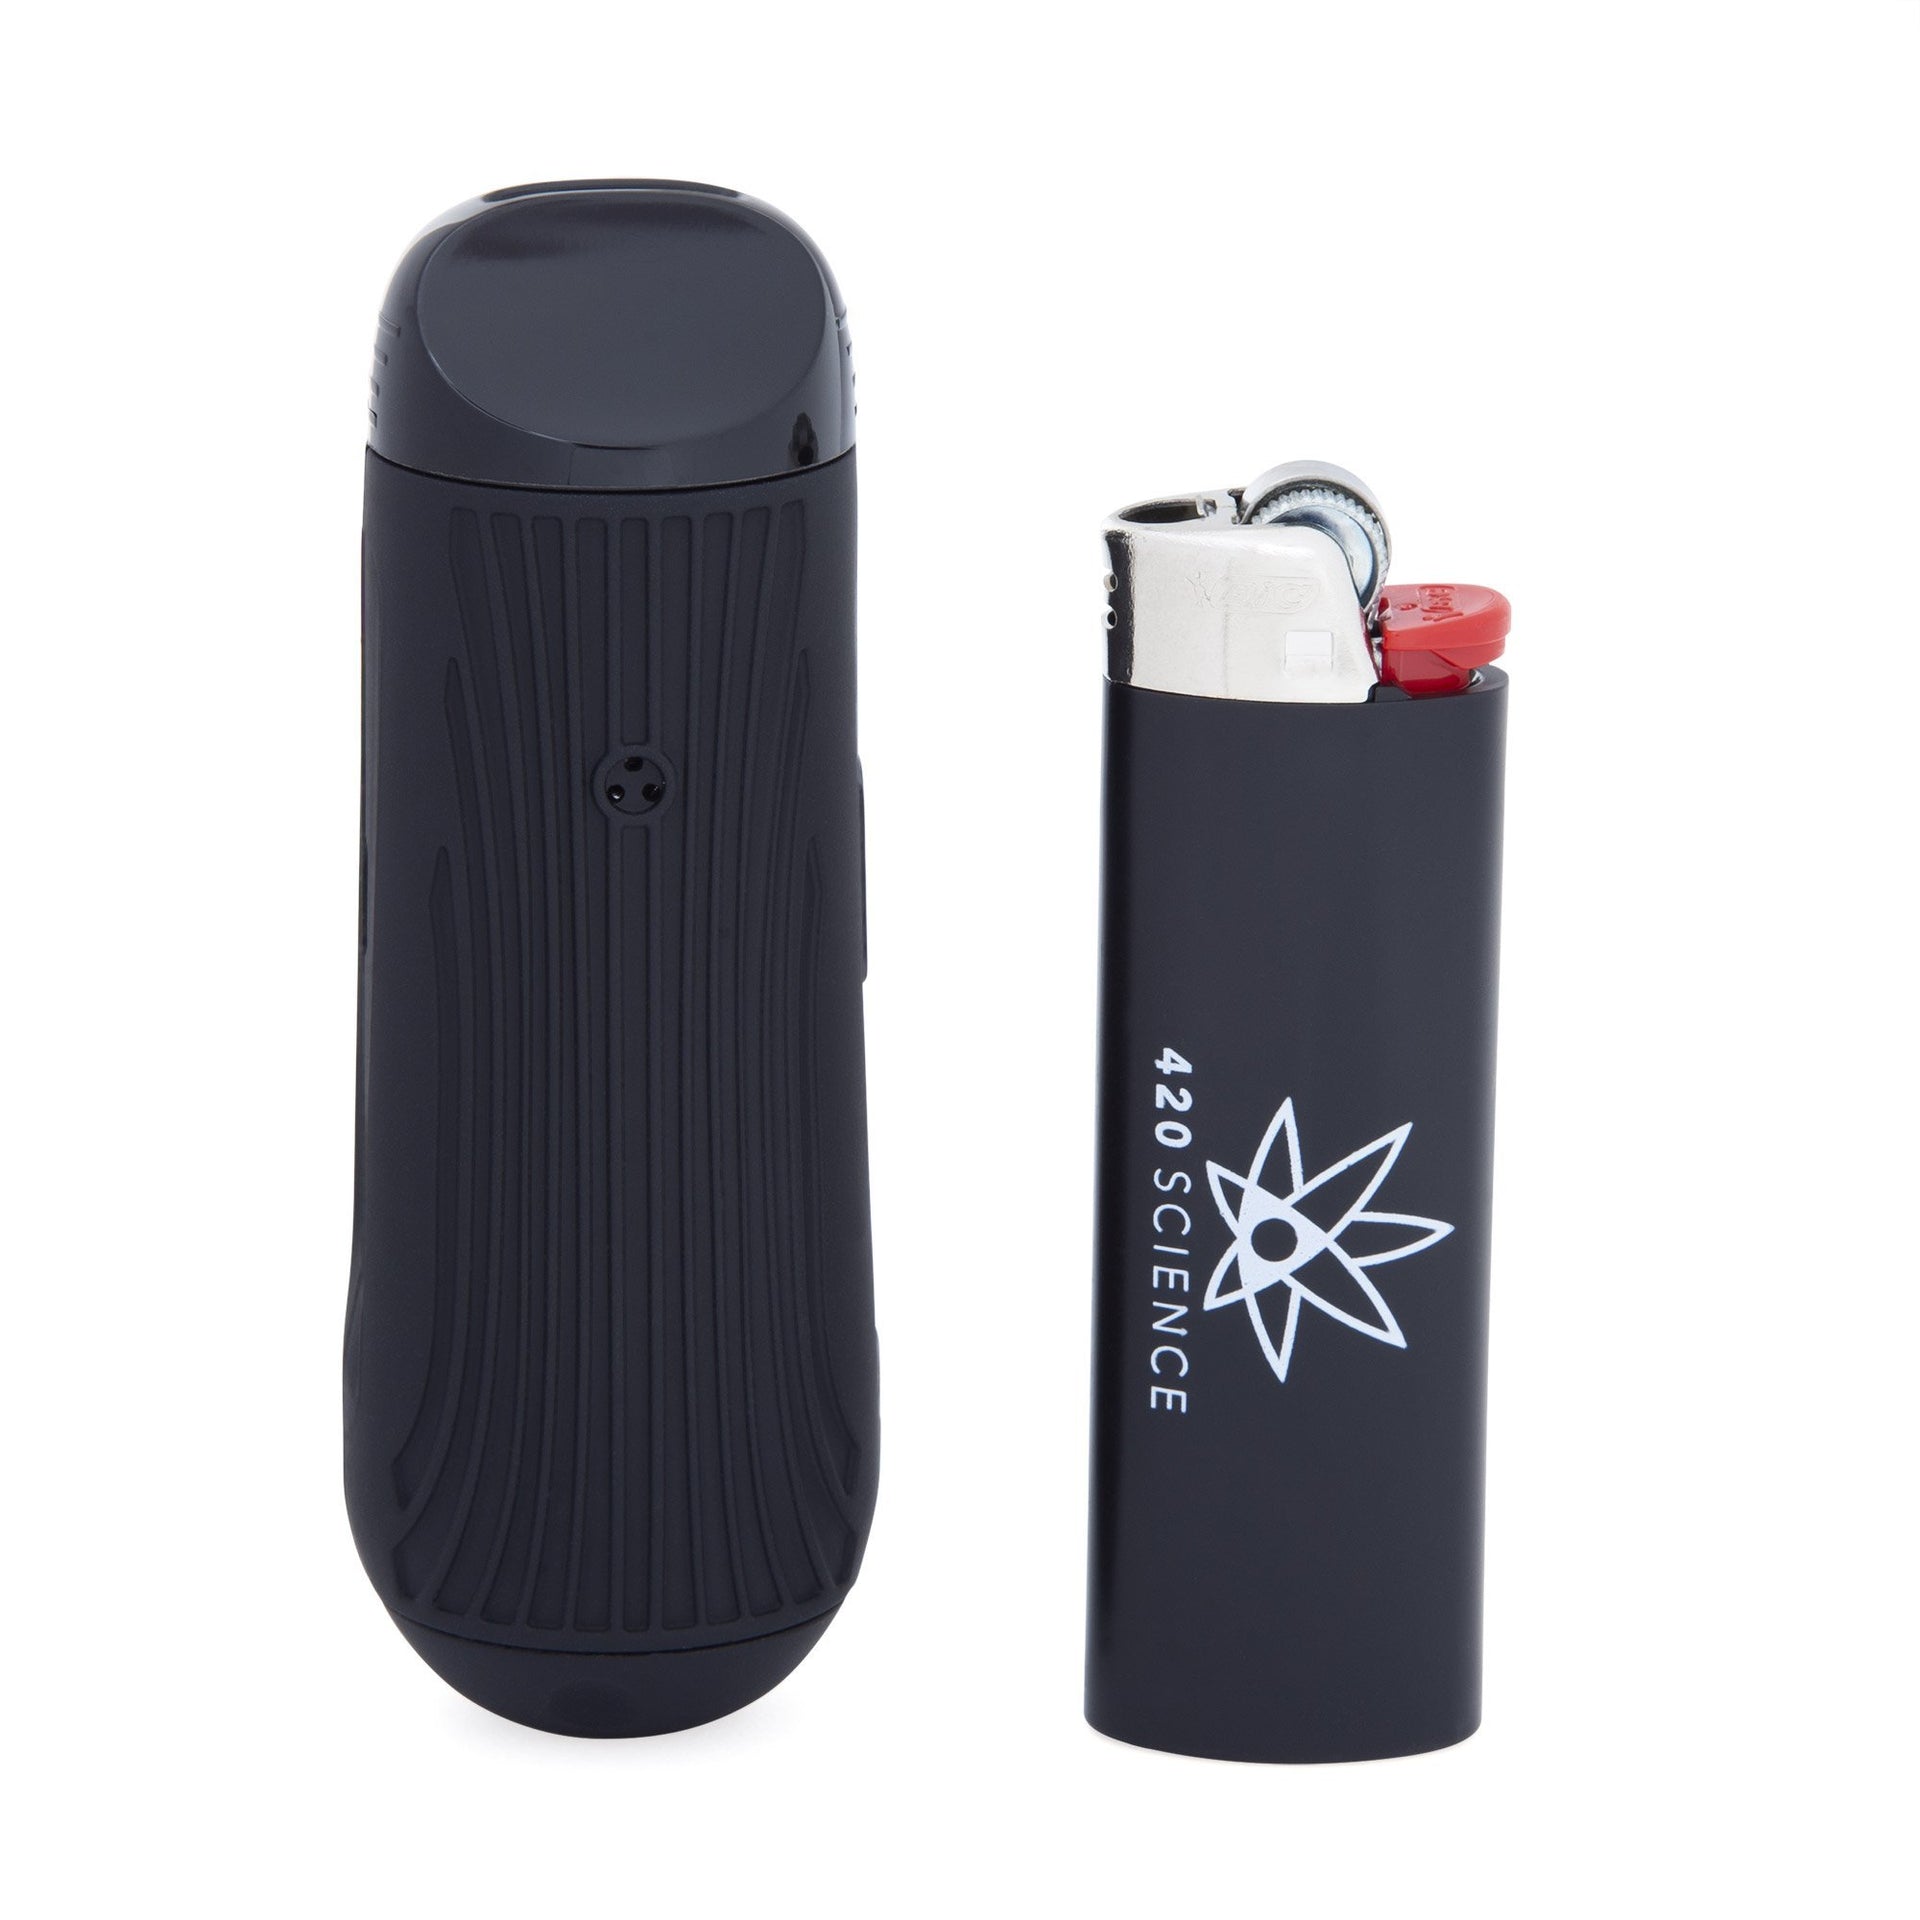 Boundless CFC Lite Vaporizer - 420 Science - The most trusted online smoke shop.